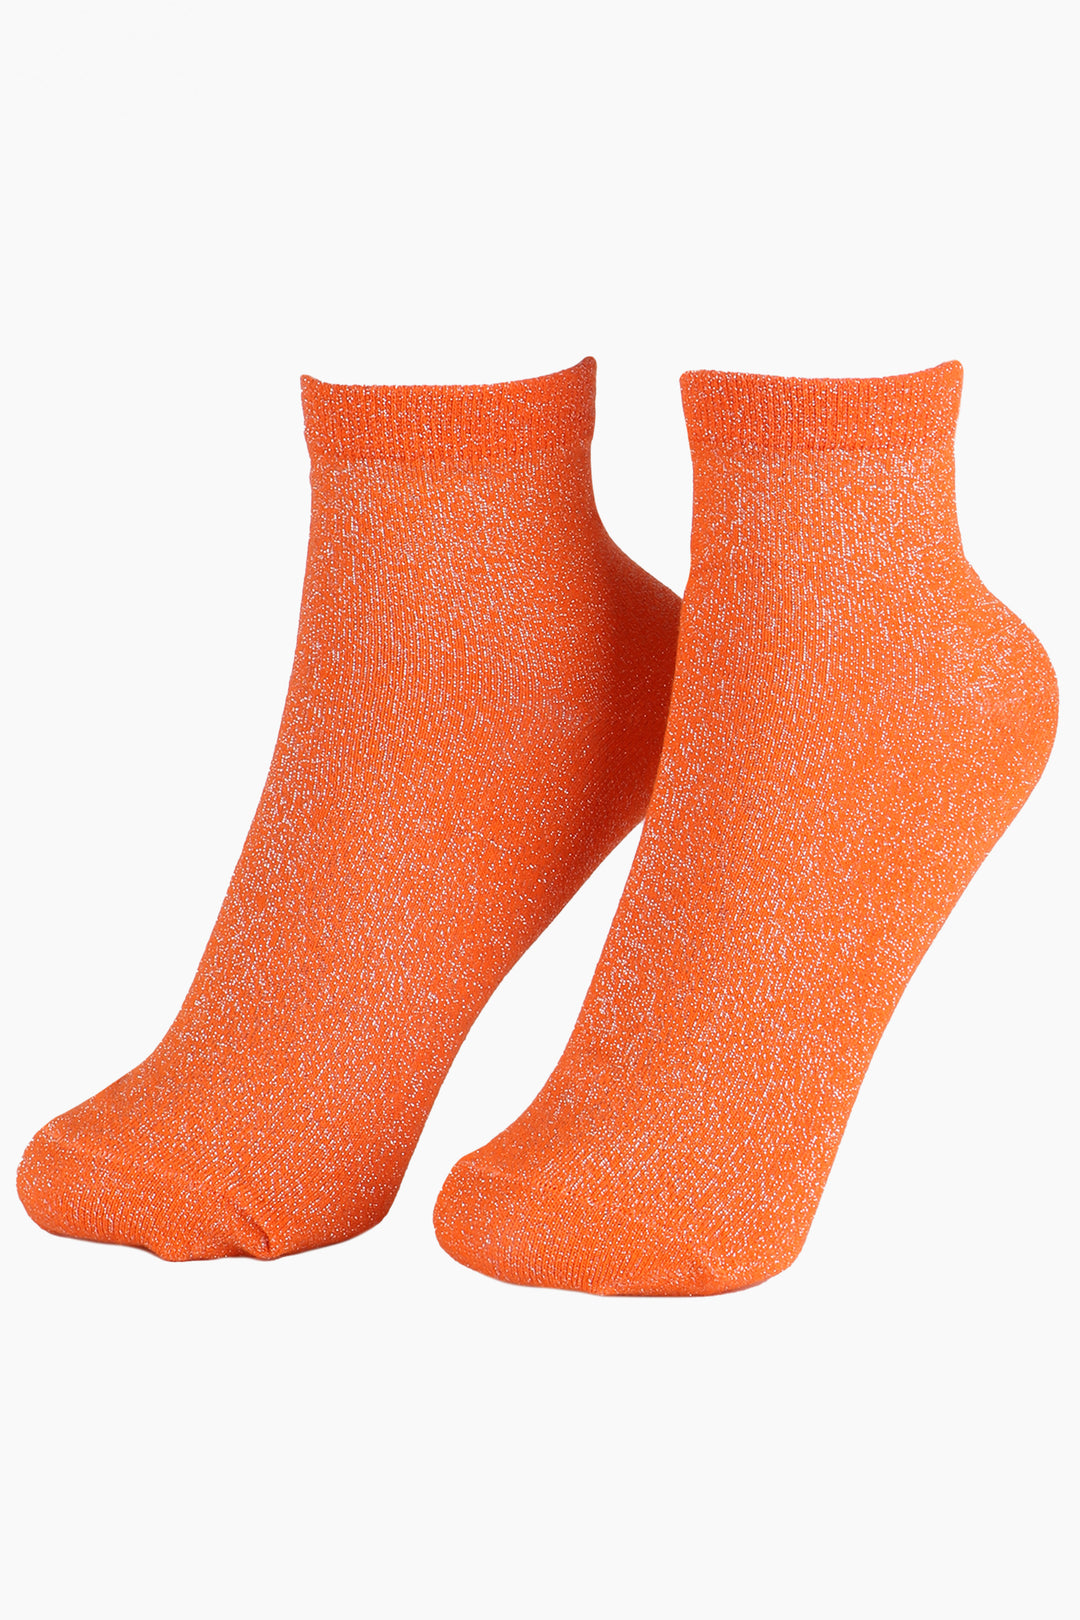 orange cotton socks with an all over silver glitter sparkle